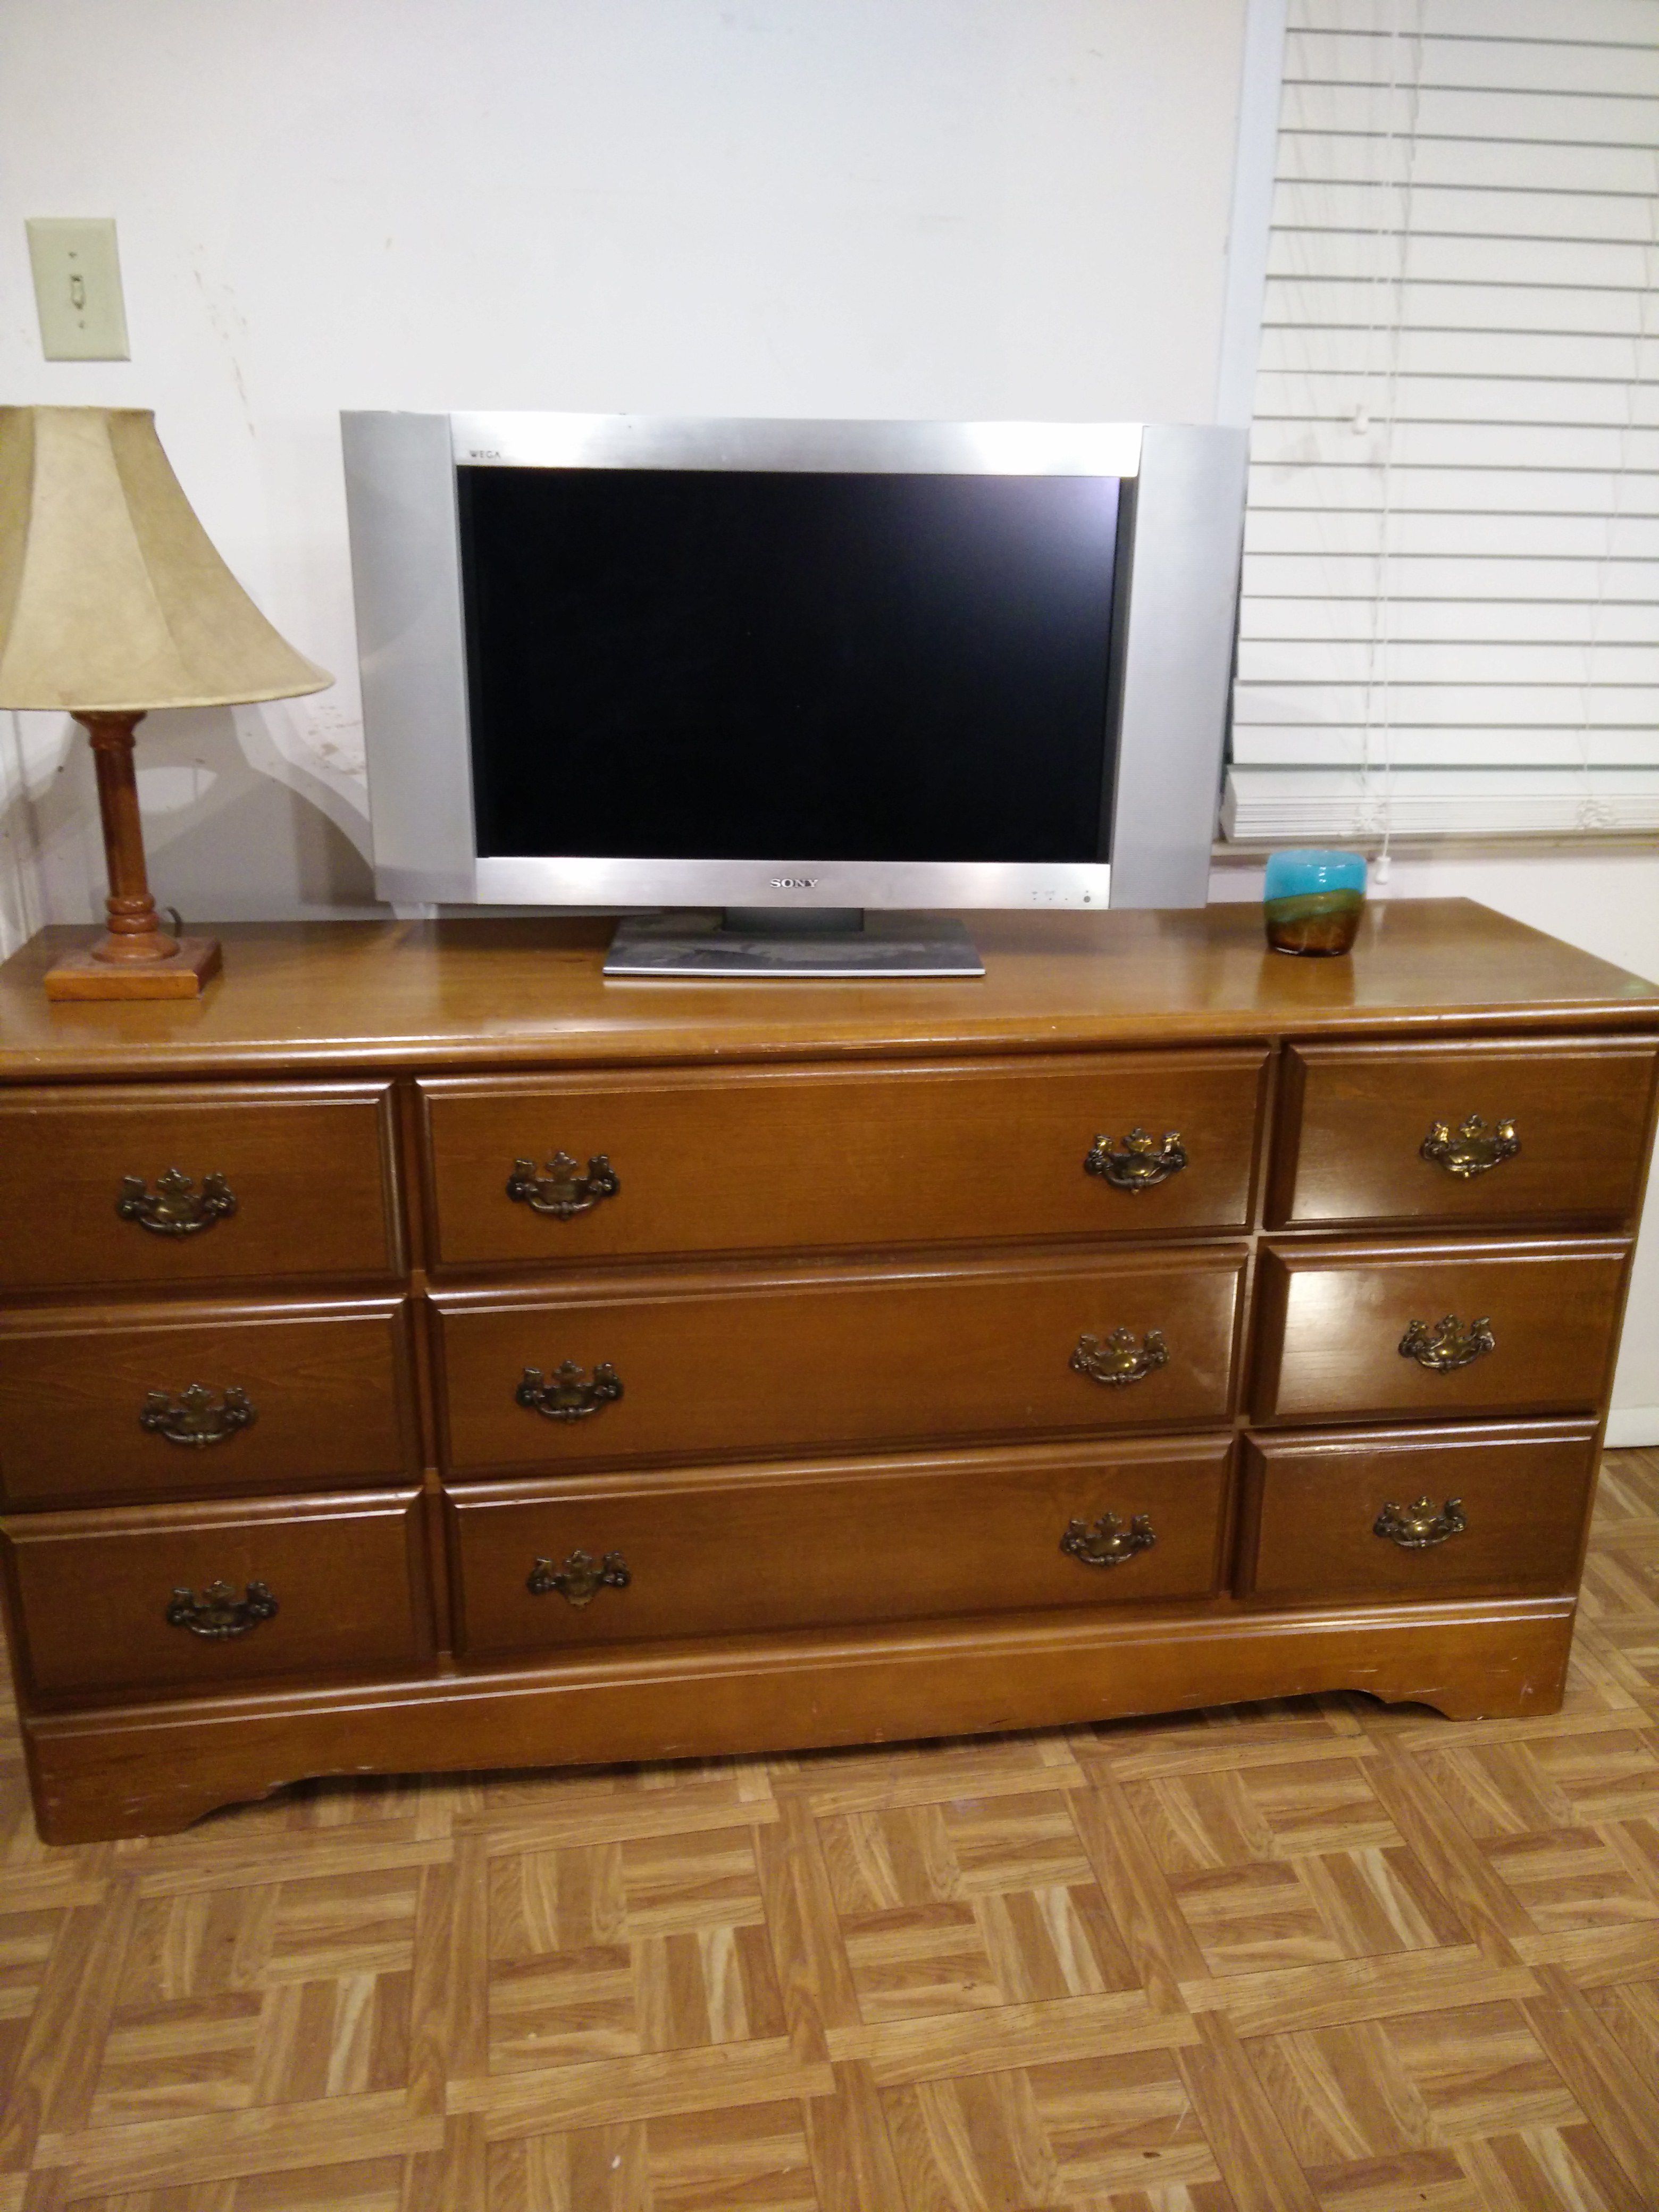 Nice solid wood dresser/ buffet/ TV stand in very good condition, all the 9 drawers sliding smoothly, pet free smoke free